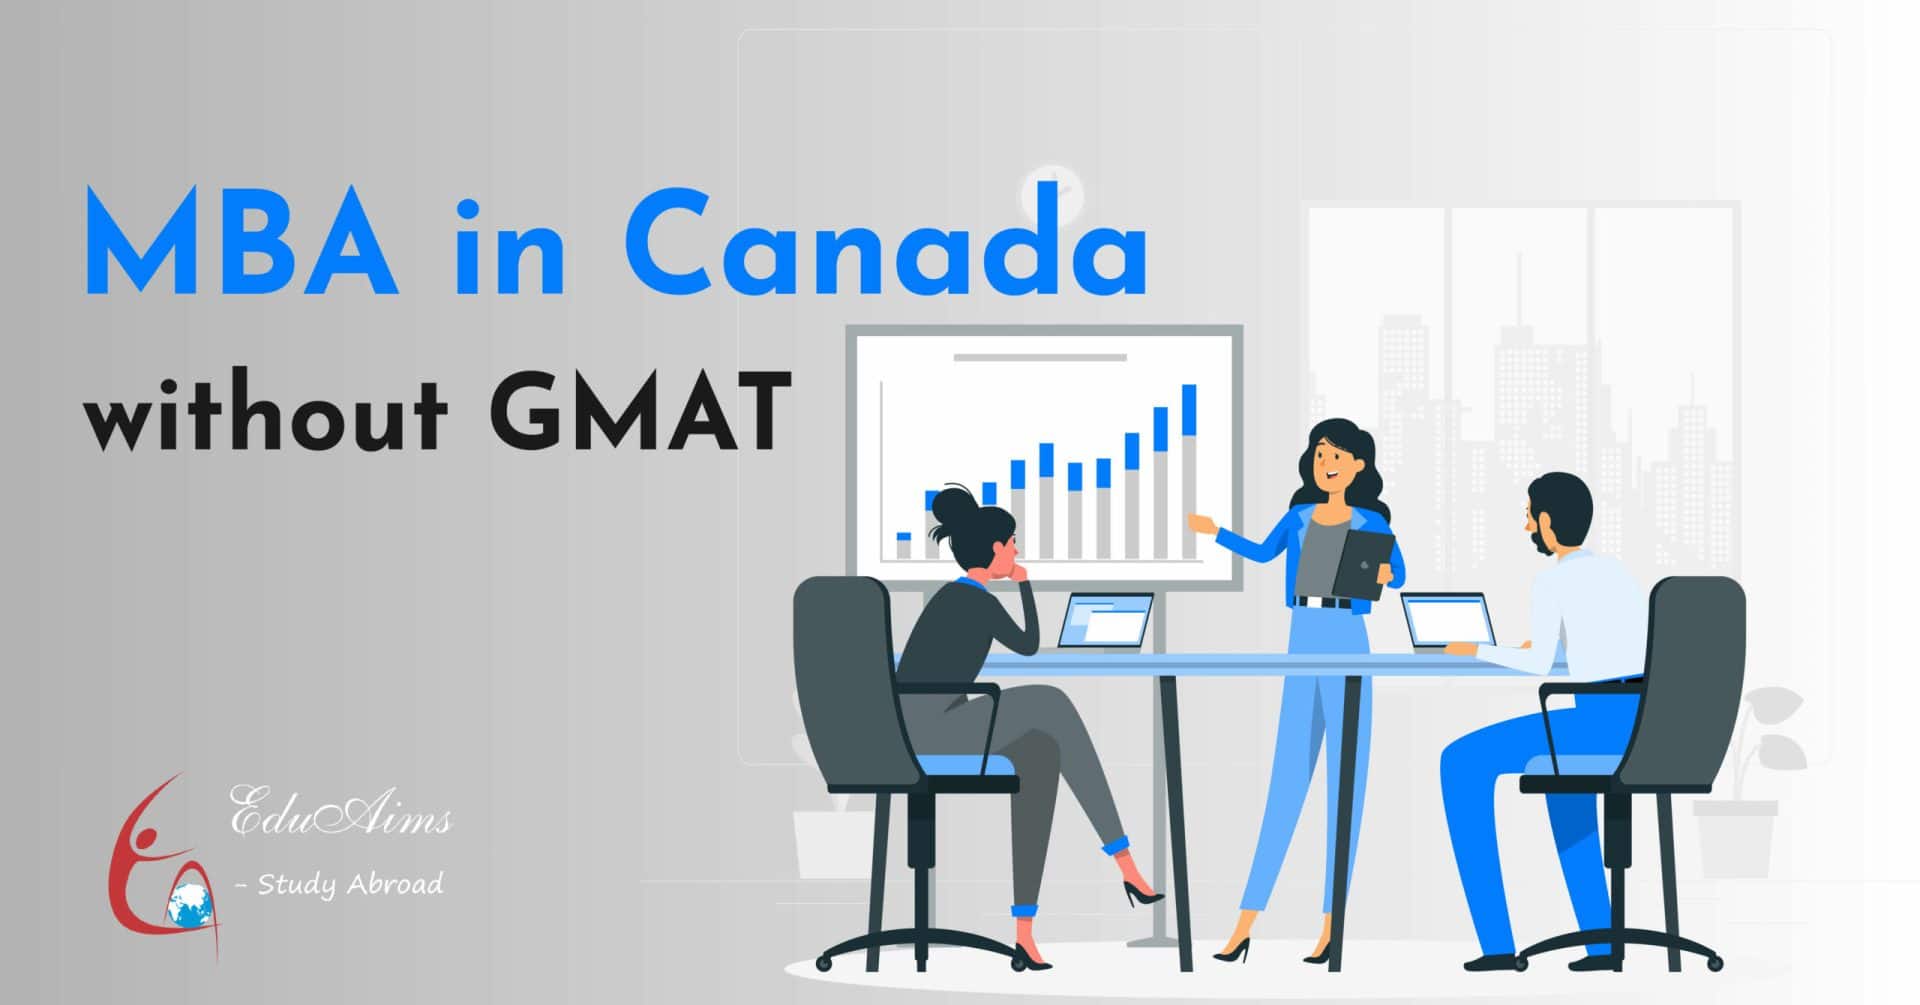 MBA in Canada without GMAT